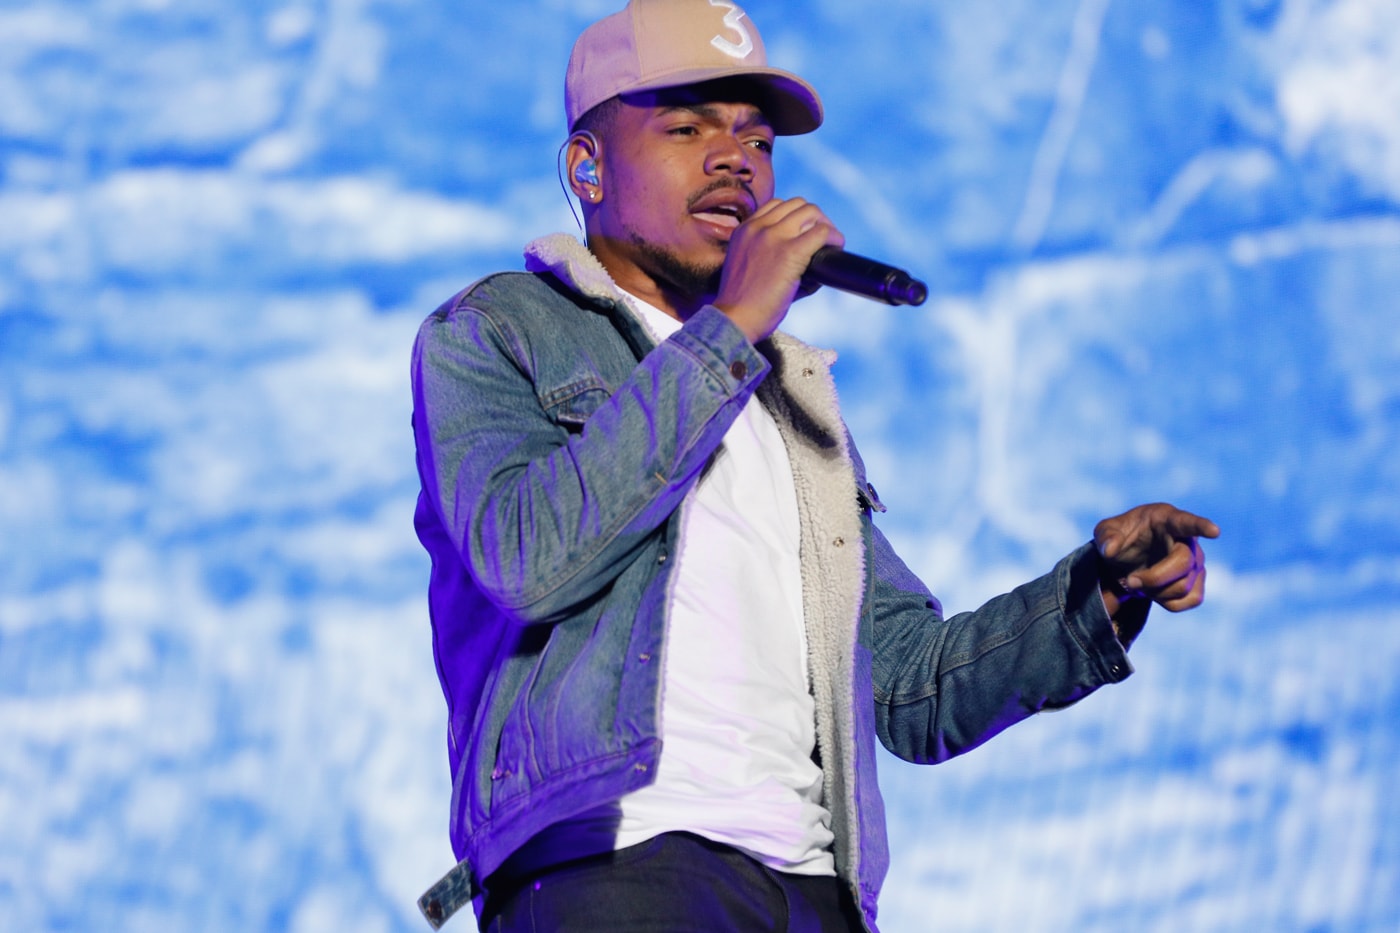 chance-the-rapper-magnificent-coloring-day-music-fest